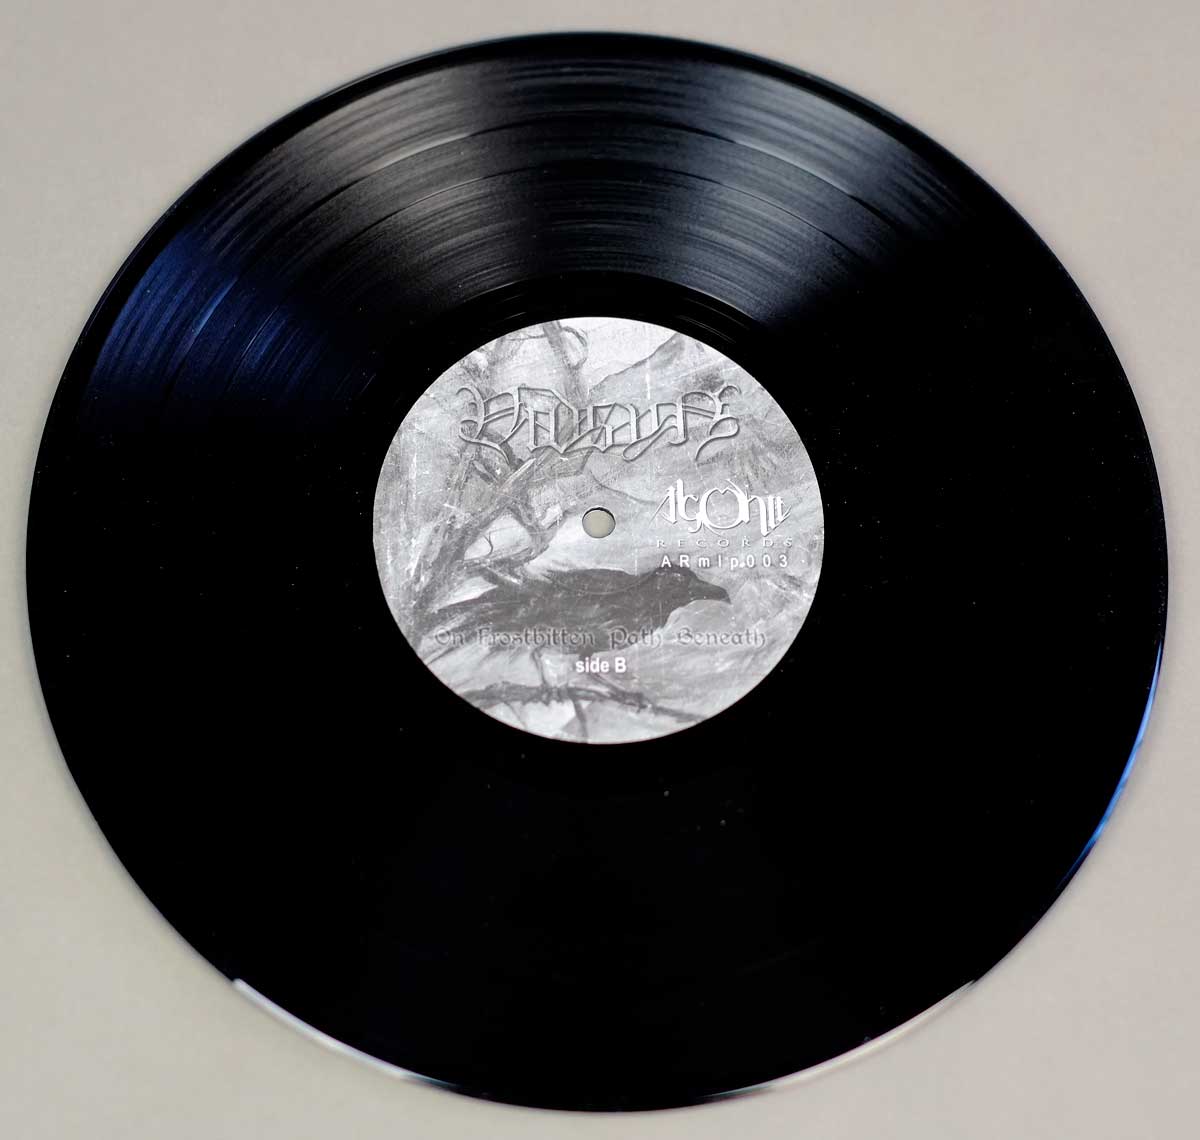 Photo of 12" LP Record Side Two VIDSYN	- On Frostbitten Path Beneath   Vinyl Record Store https://vinyl-records.nl//